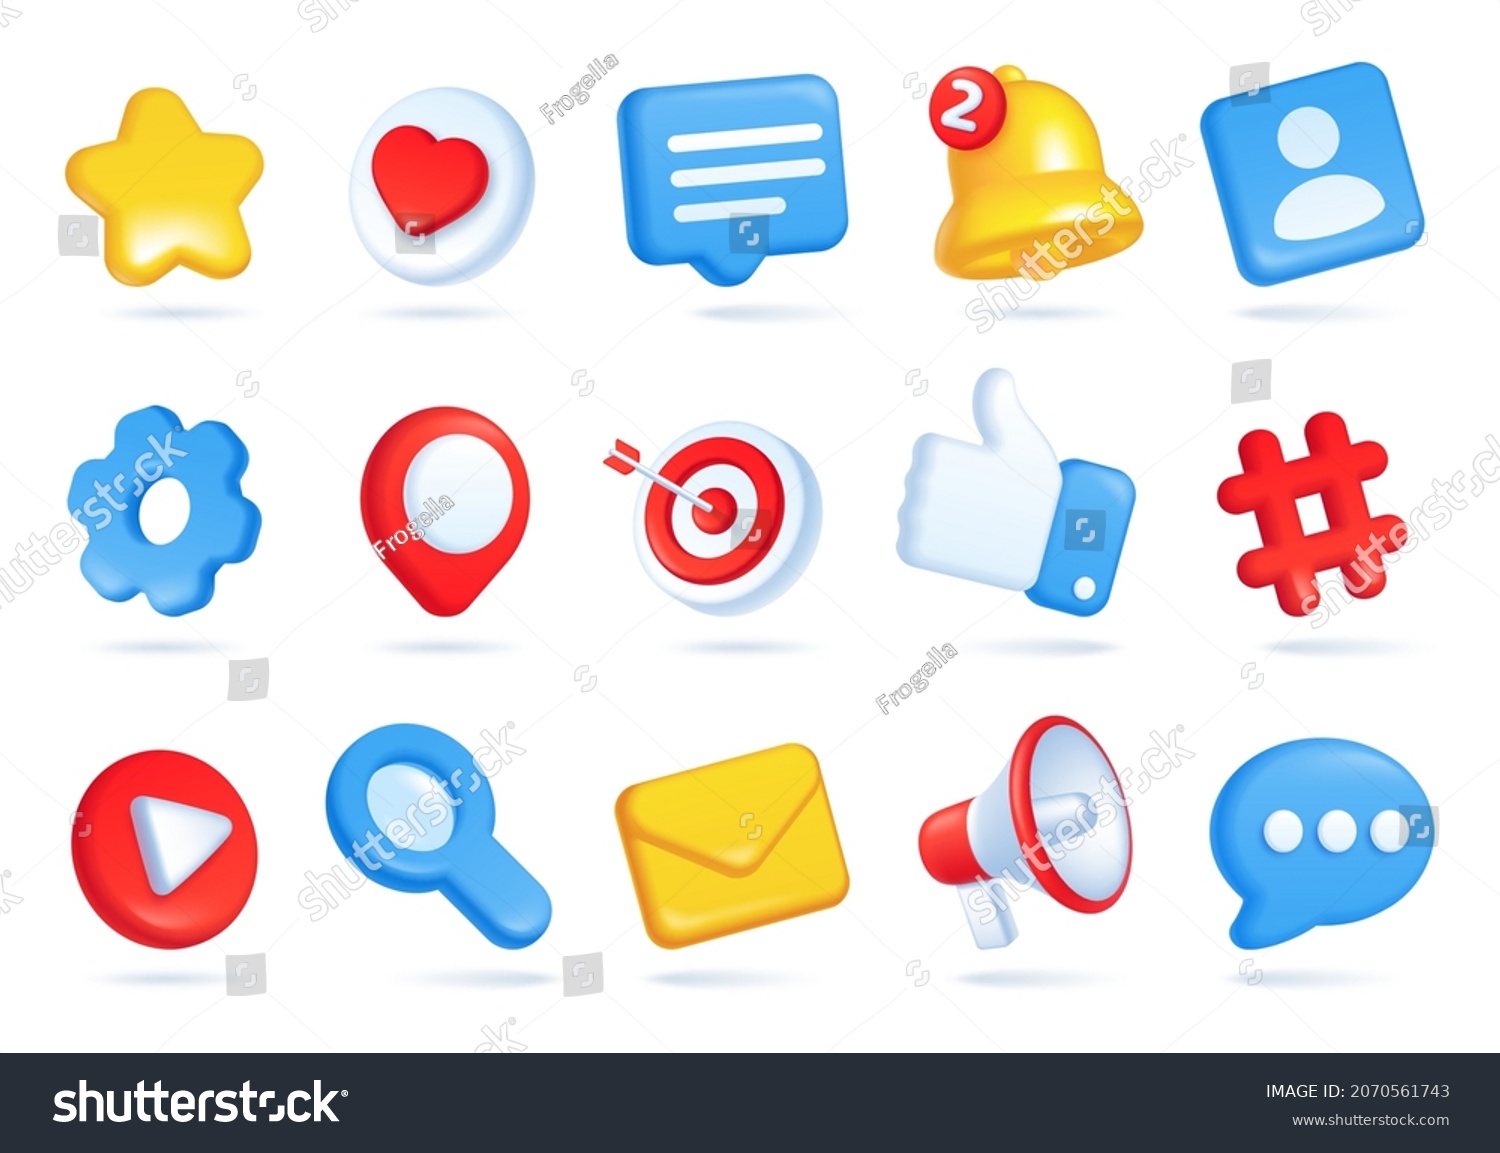 3d social media icons, online communication, digital marketing symbols. Like button, speech bubble, notification bell, hashtag icon vector set. Elements for networking sites, applications #2070561743